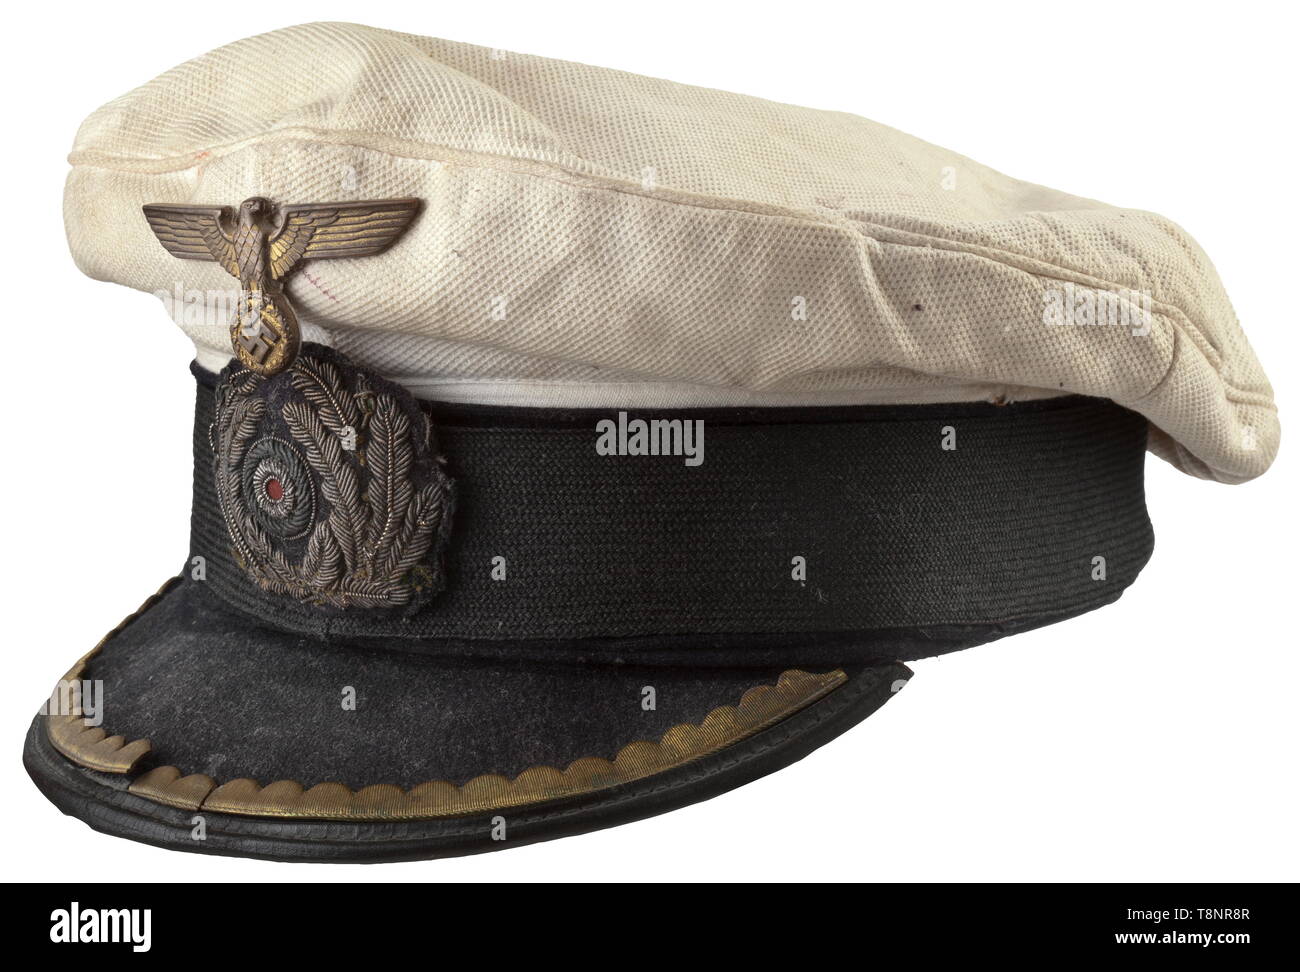 A visor cap for a U-boat commander Removable cover of white waffled piqué (soiled), a black mohair band, the visor with a golden wreath of stamped sheet brass (broken) for the rank group of subaltern officers. A gold-embroidered oak leaf wreath (darkened) and a gilded metal eagle with the manufacturer's mark. Front peak loose or re-stitched. Yellow silk liner with cap trapezoid, brown leather sweatband. Extremely rare visor cap for commander. Obvious signs of age and wear due to sea water and usage. According to the consigner, the former wearer was awarded the German Cross , Editorial-Use-Only Stock Photo